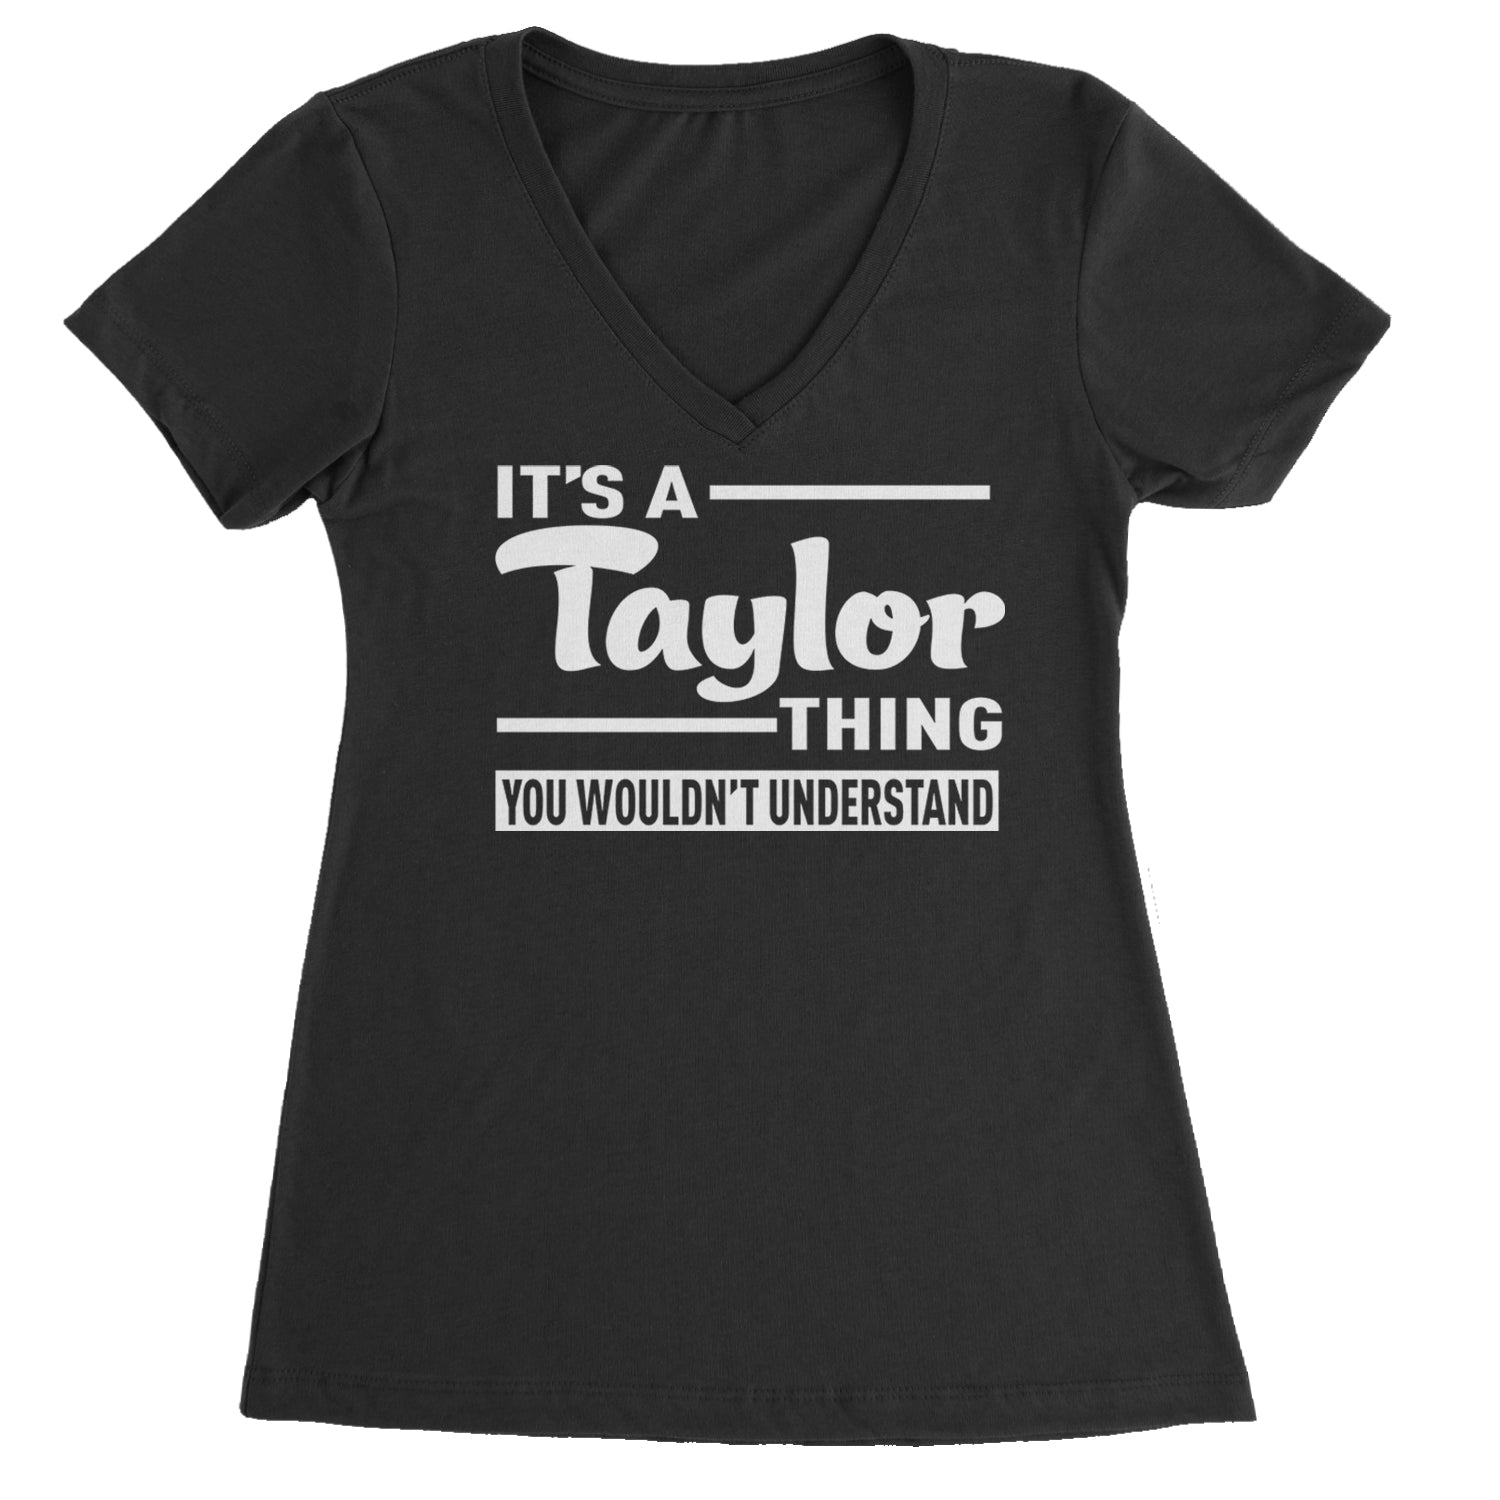 It's A Taylor Thing, You Wouldn't Understand TTPD Ladies V-Neck T-shirt